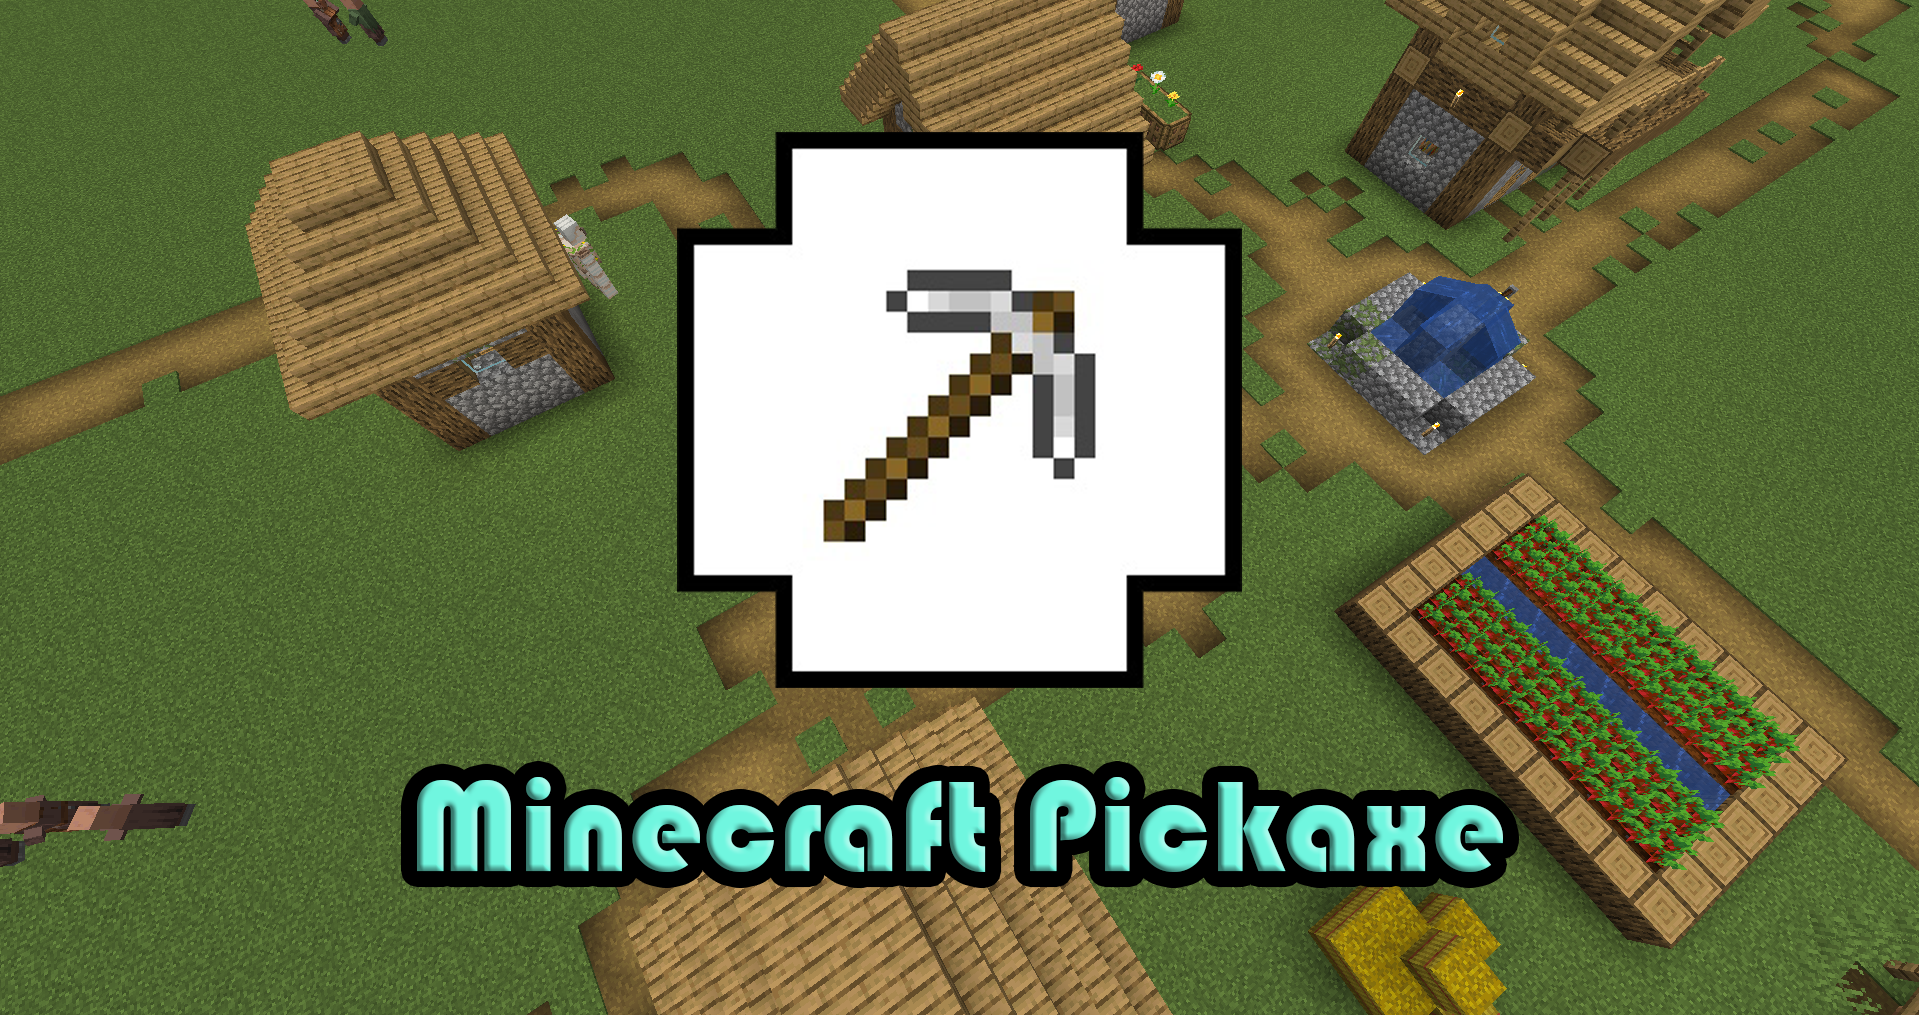 How To Use A Pickaxe in Minecraft